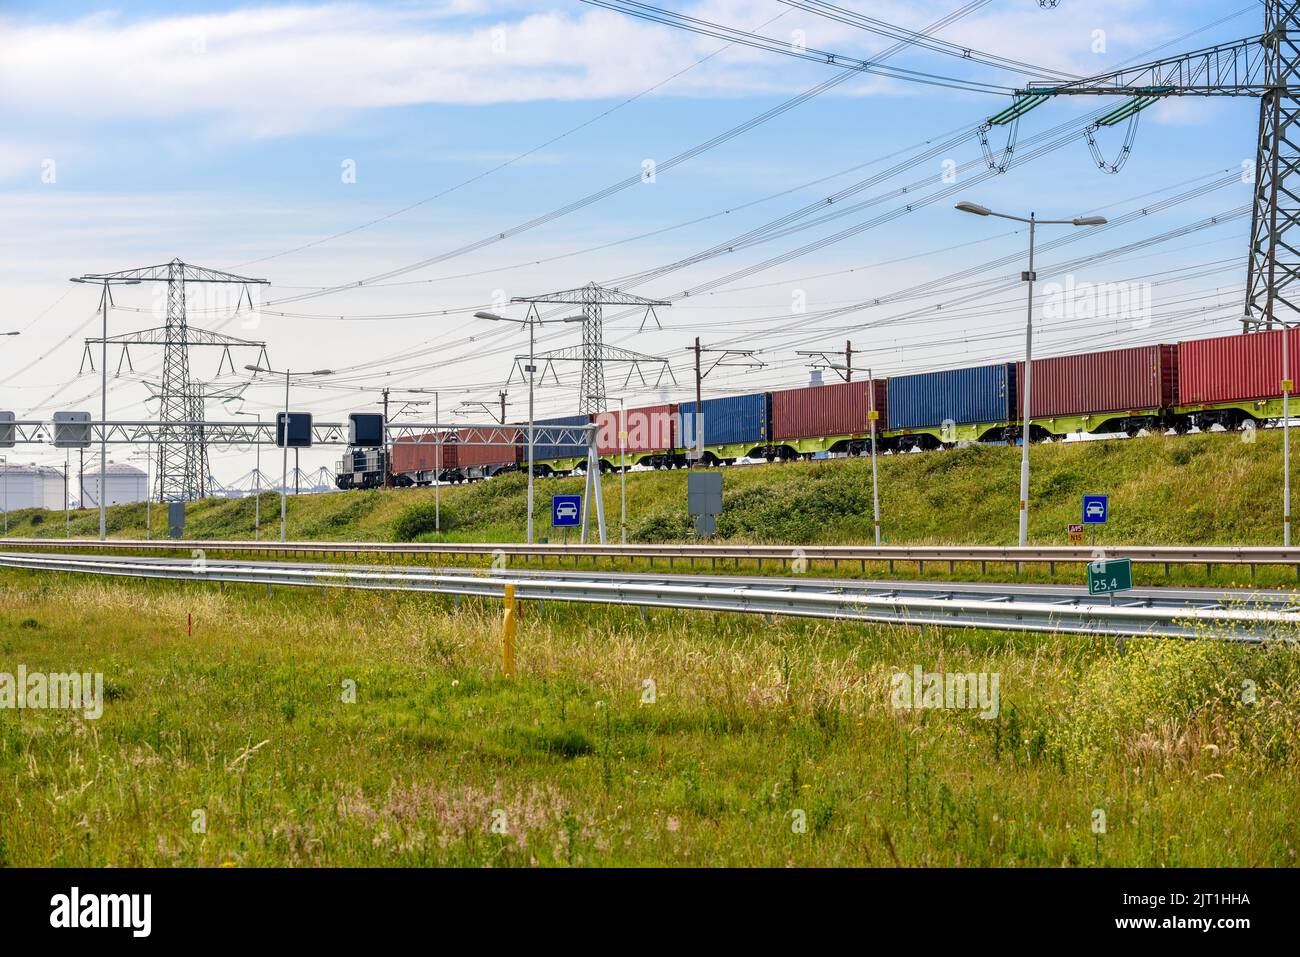 Cargo train loaded with containers running along a motorway in a port area on a clear summer day. Electricity pylons and fuel tanks are in background. Stock Photo